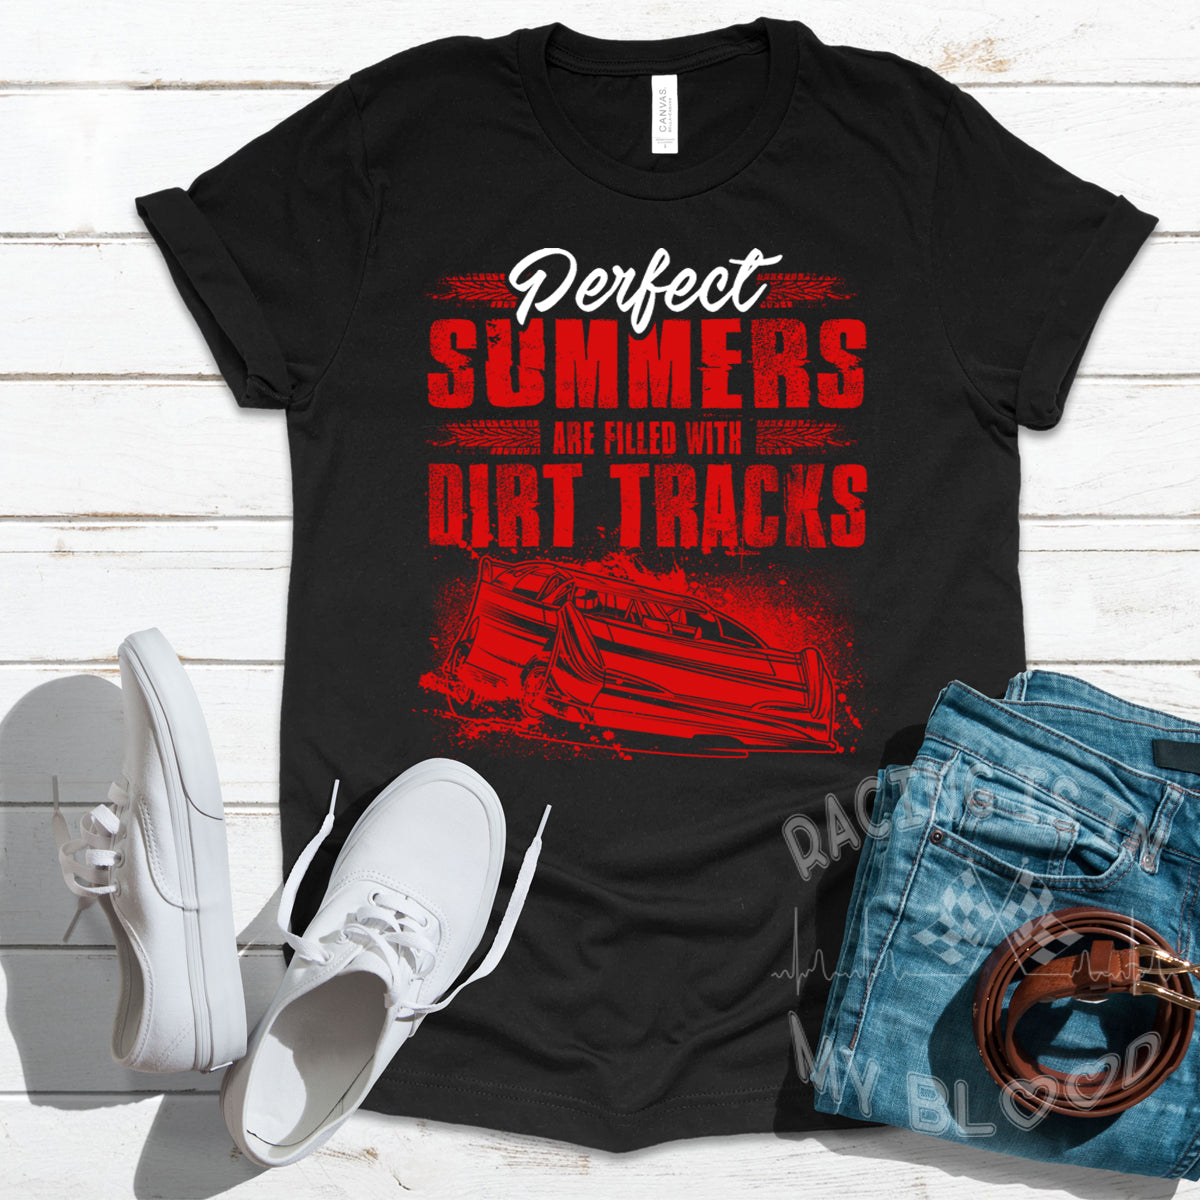 Perfect Summers Are Filled With Dirt Tracks RedV T-Shirts!